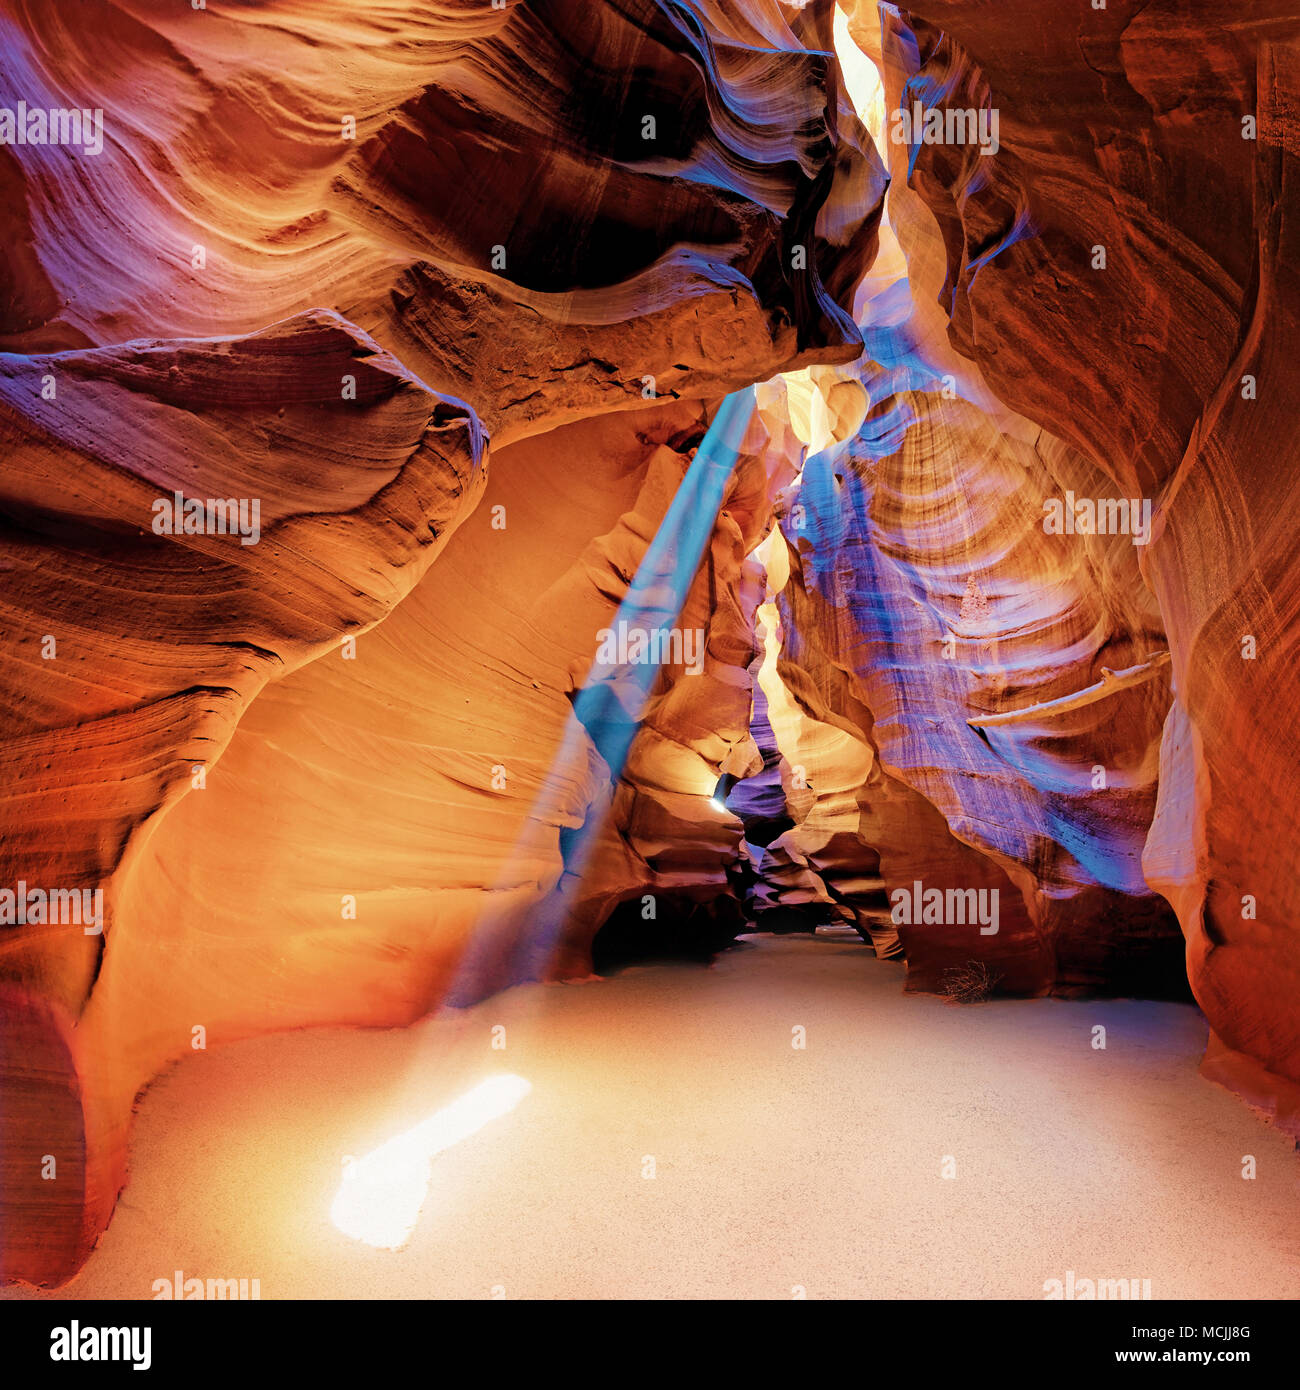 Incident light rays and yellow-red sandstone formations, Upper Antelope Canyon, near Page, Arizona, USA, North America Stock Photo